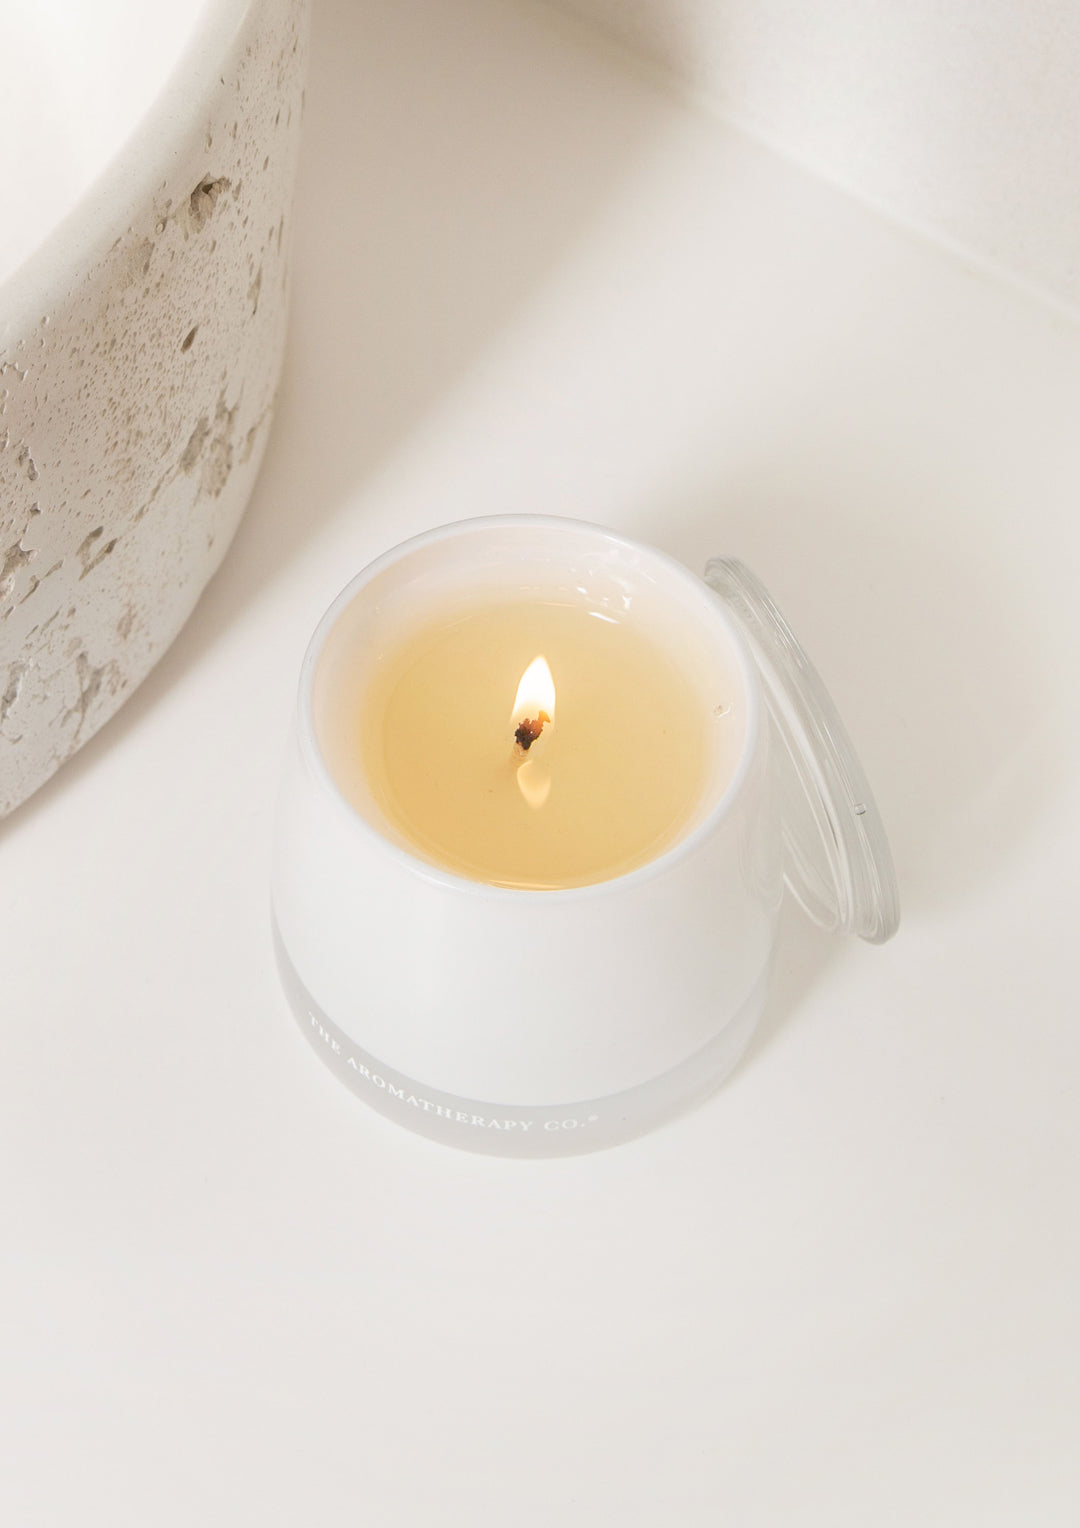 Therapy Candle Relax - Lavender & Clary Sage